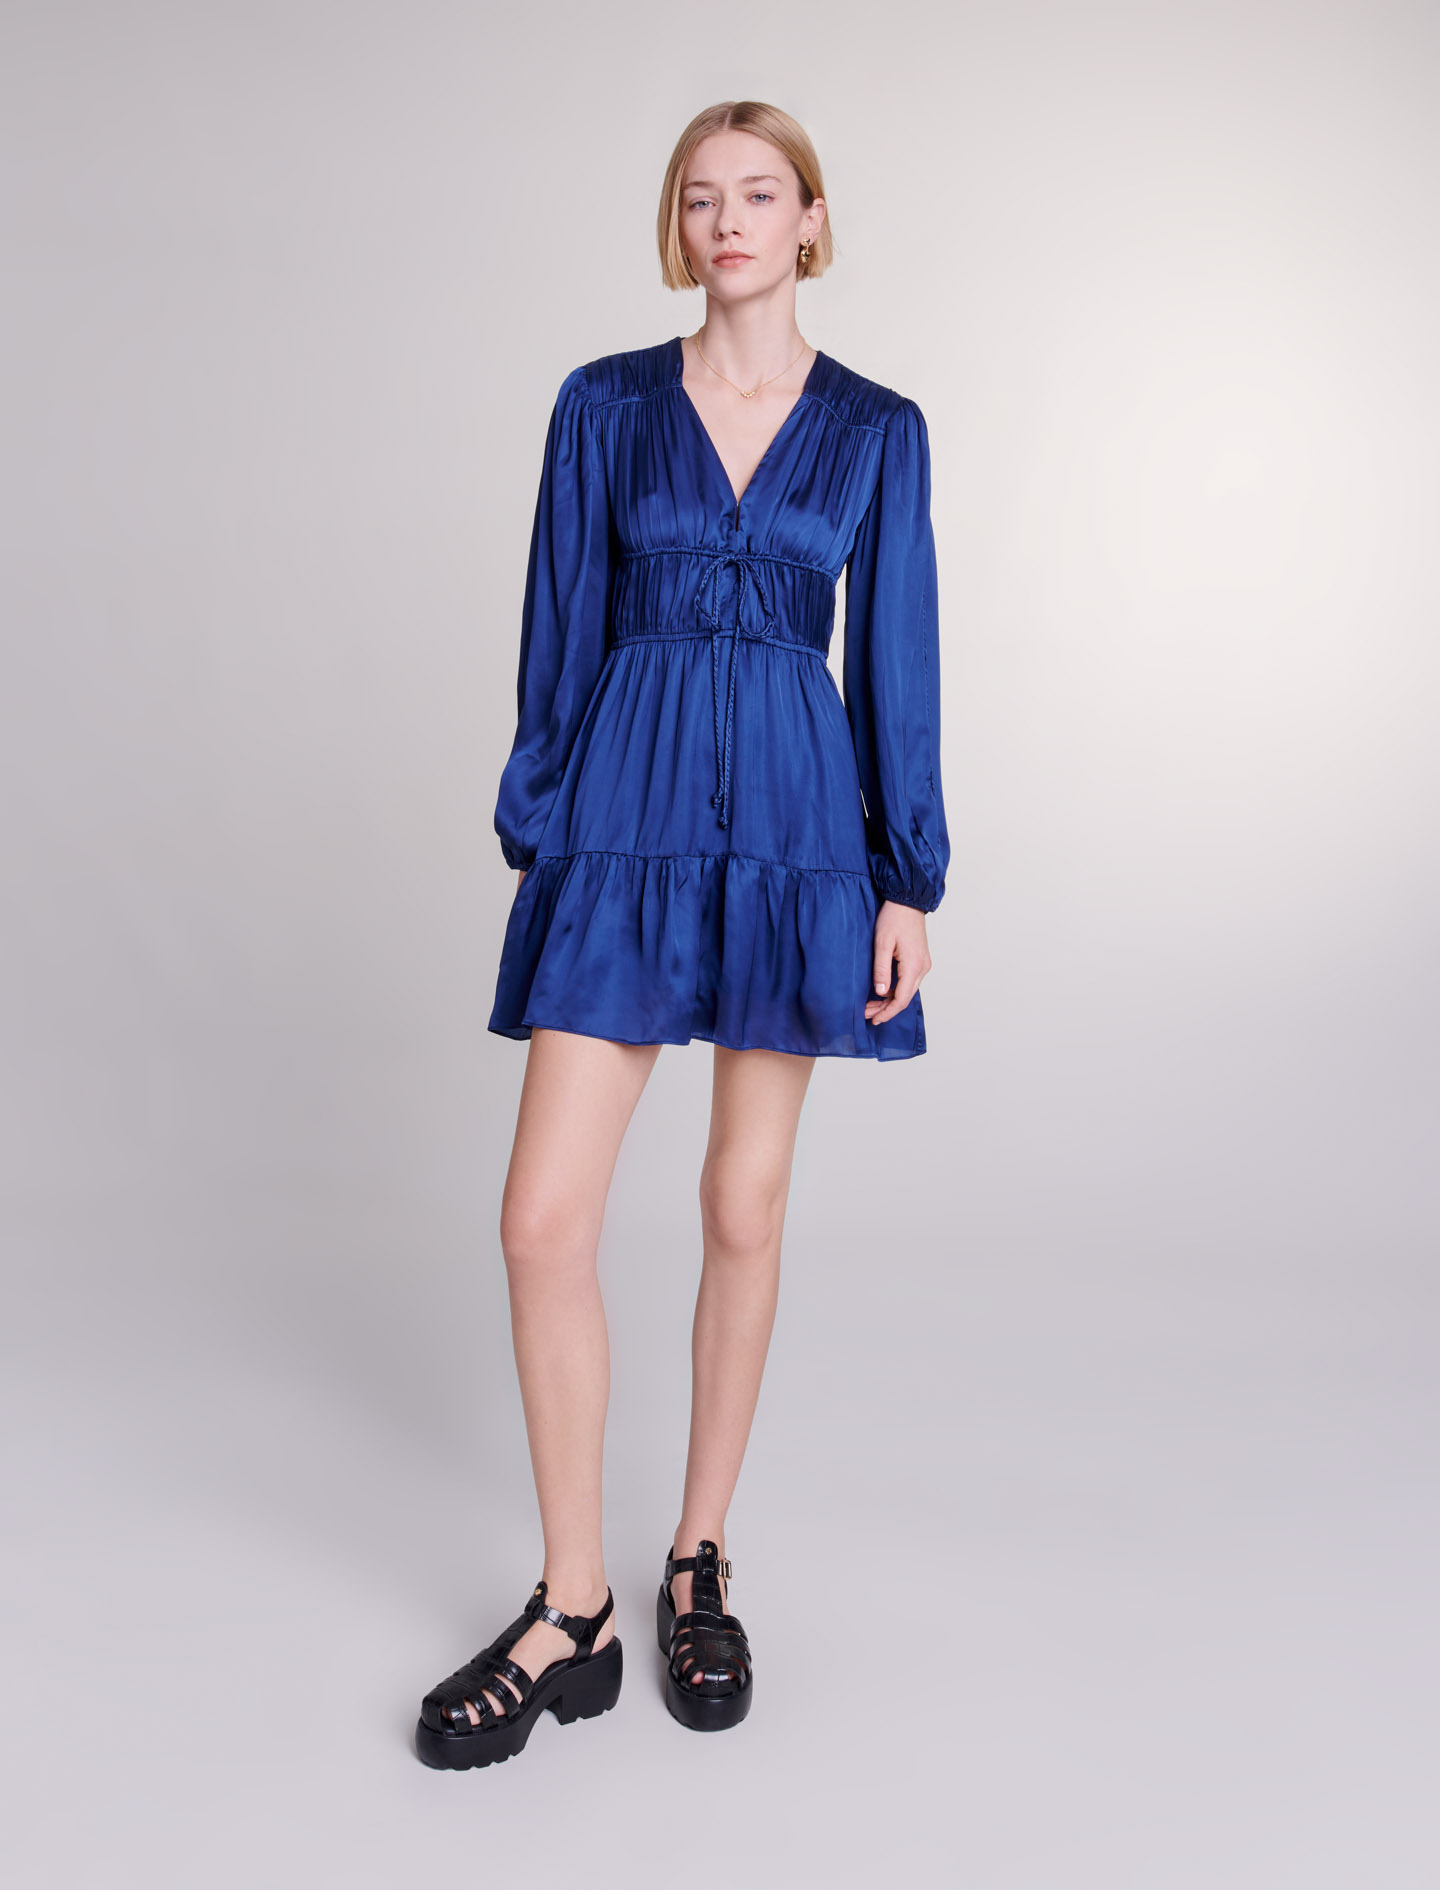 Maje Woman's cupro Lower lining: Short satin-look dress for Spring/Summer, in color Navy / Blue